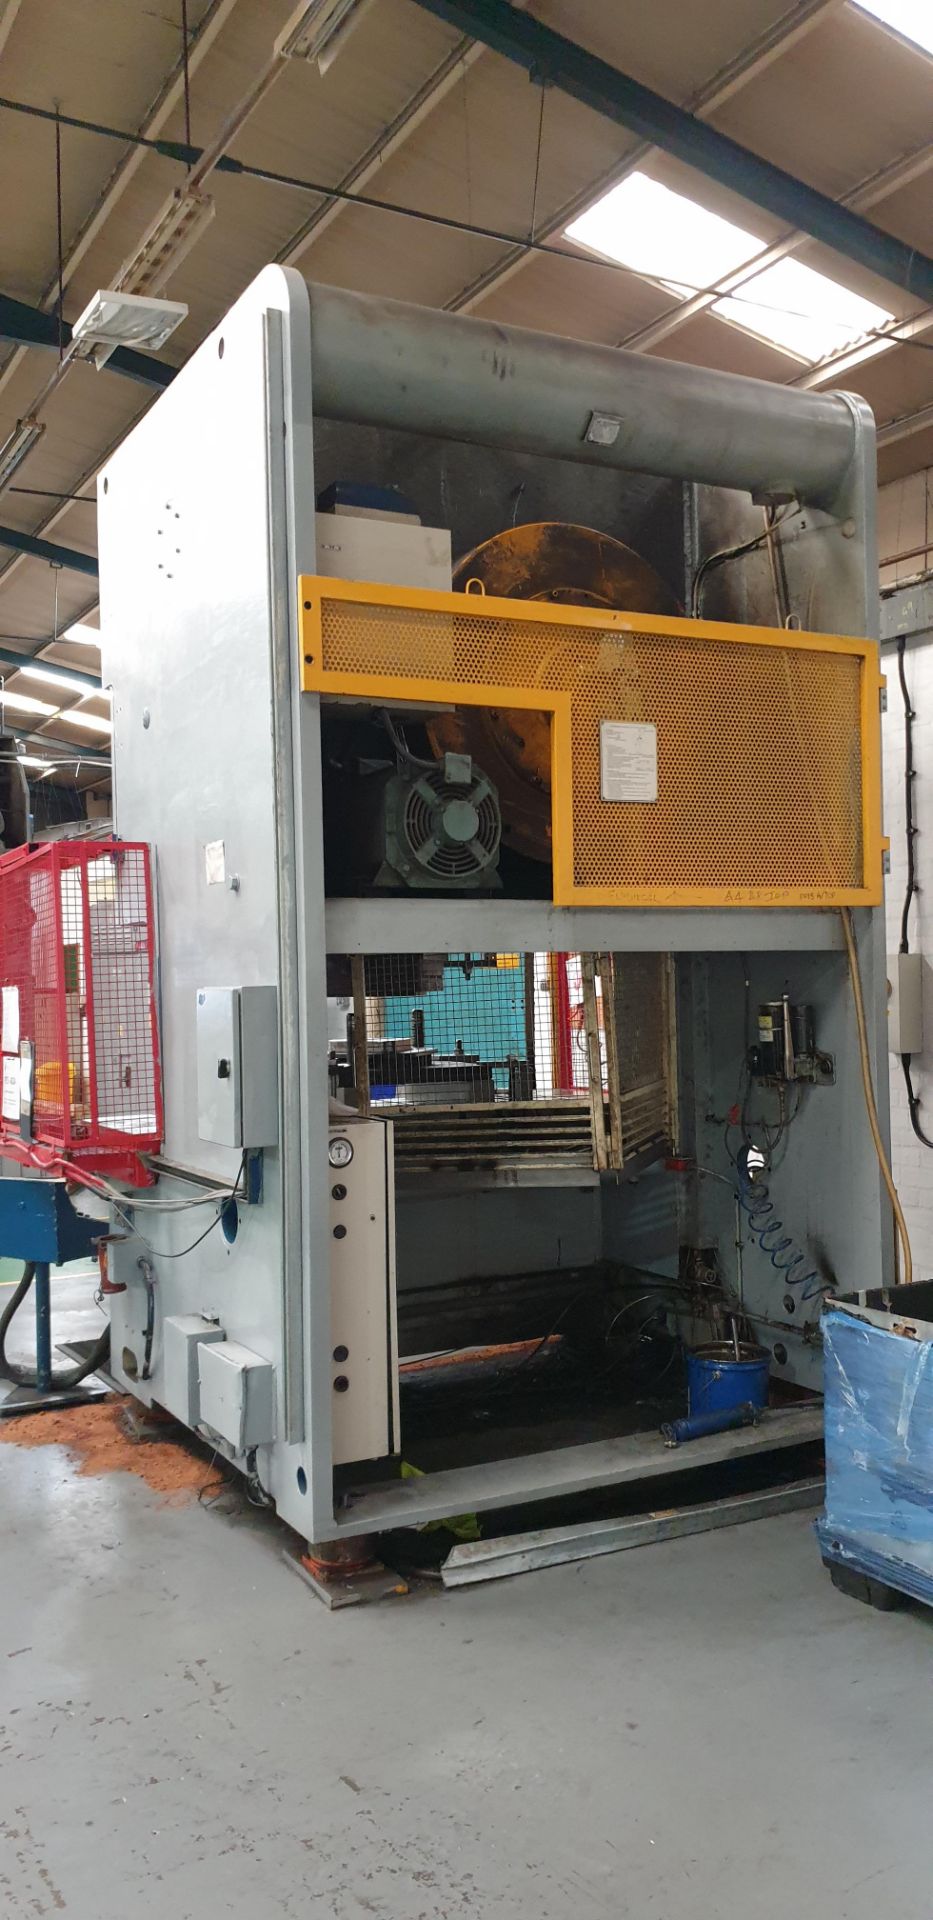 Aida NC2-160, 160-Tonne Rated C-Frame Mechanical Power Press, Table Size 2040 X 760mm With Light Gua - Image 2 of 3